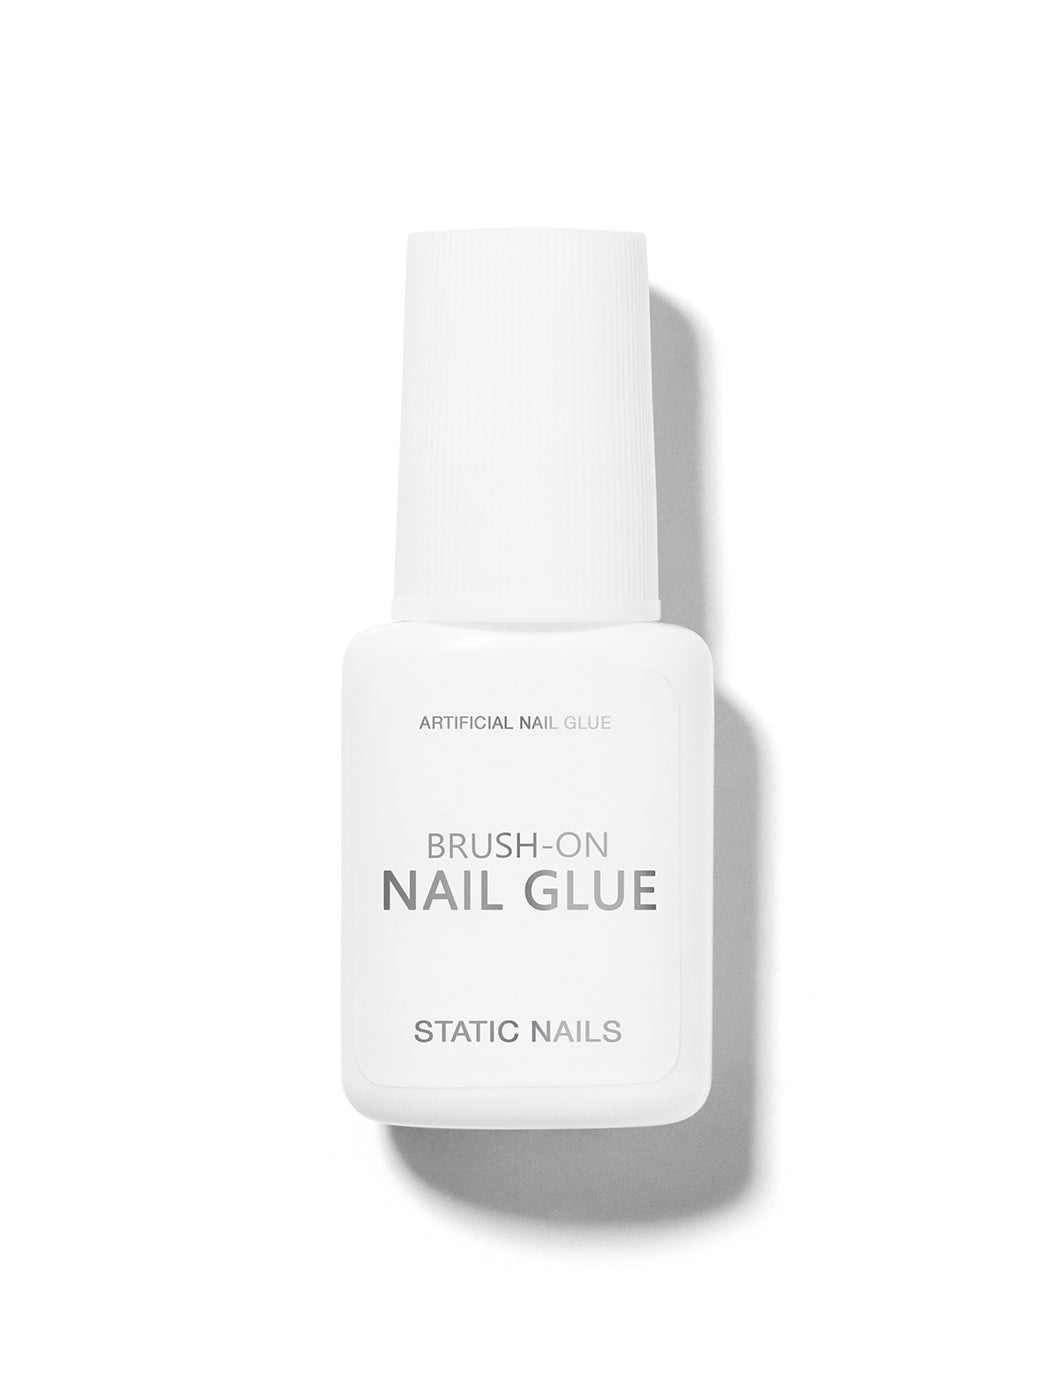 How to Get Nail Glue Off Your Skin, According to Manicurists